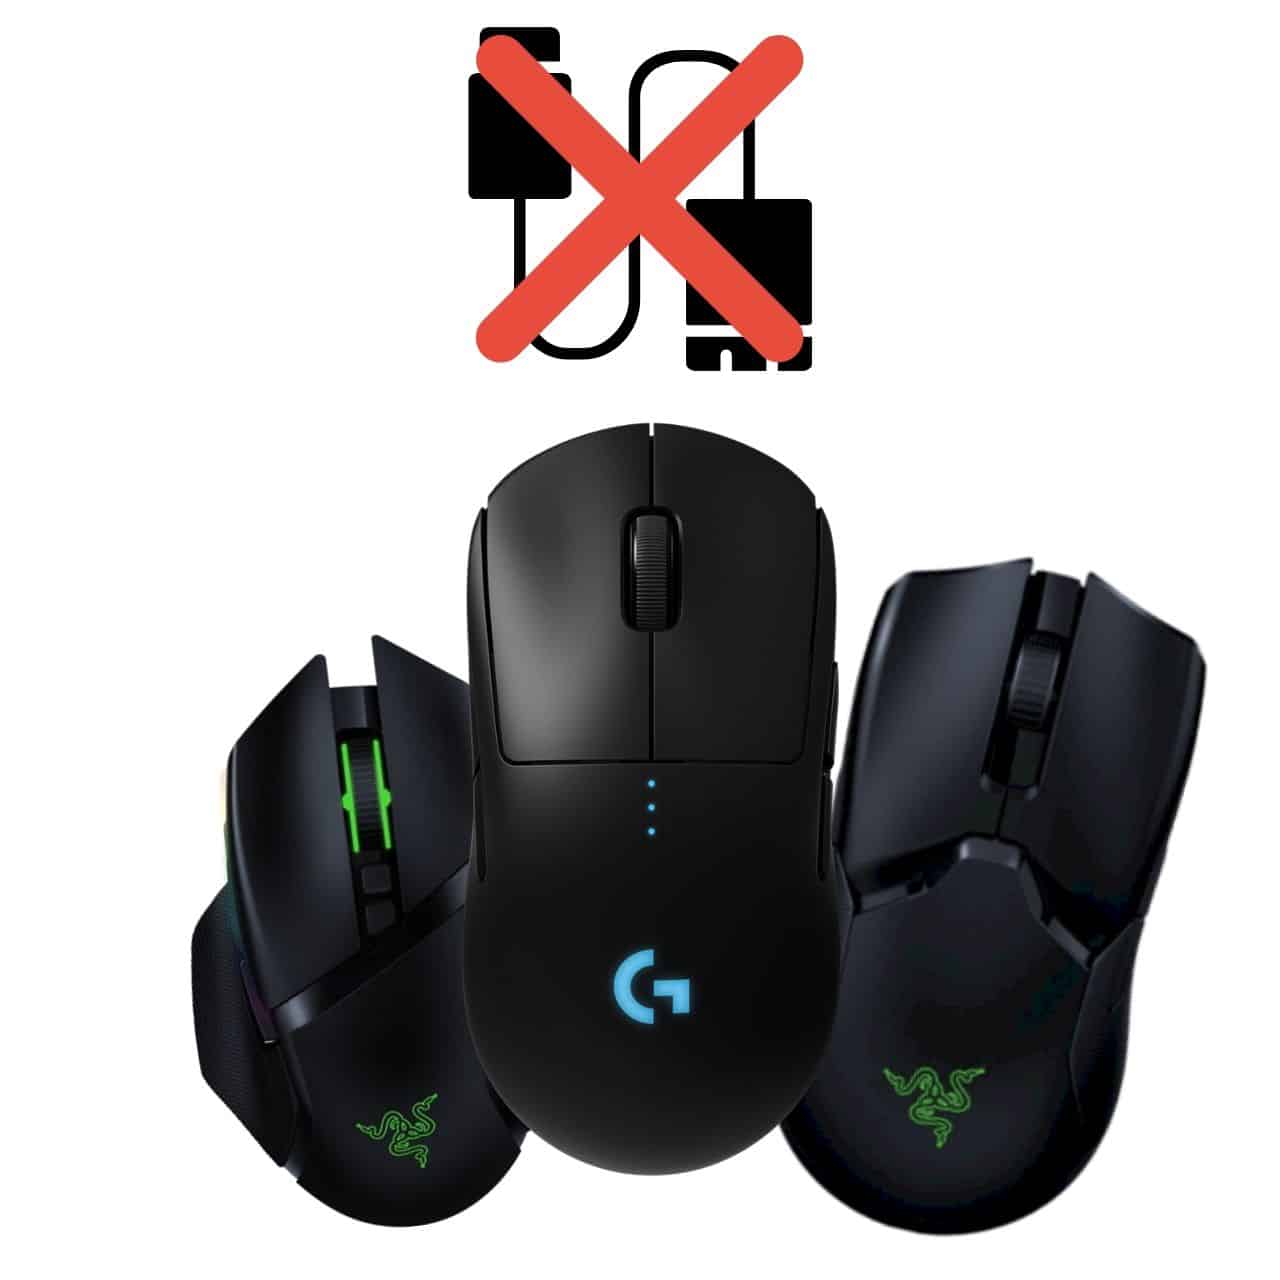 Best wireless mouse for gaming